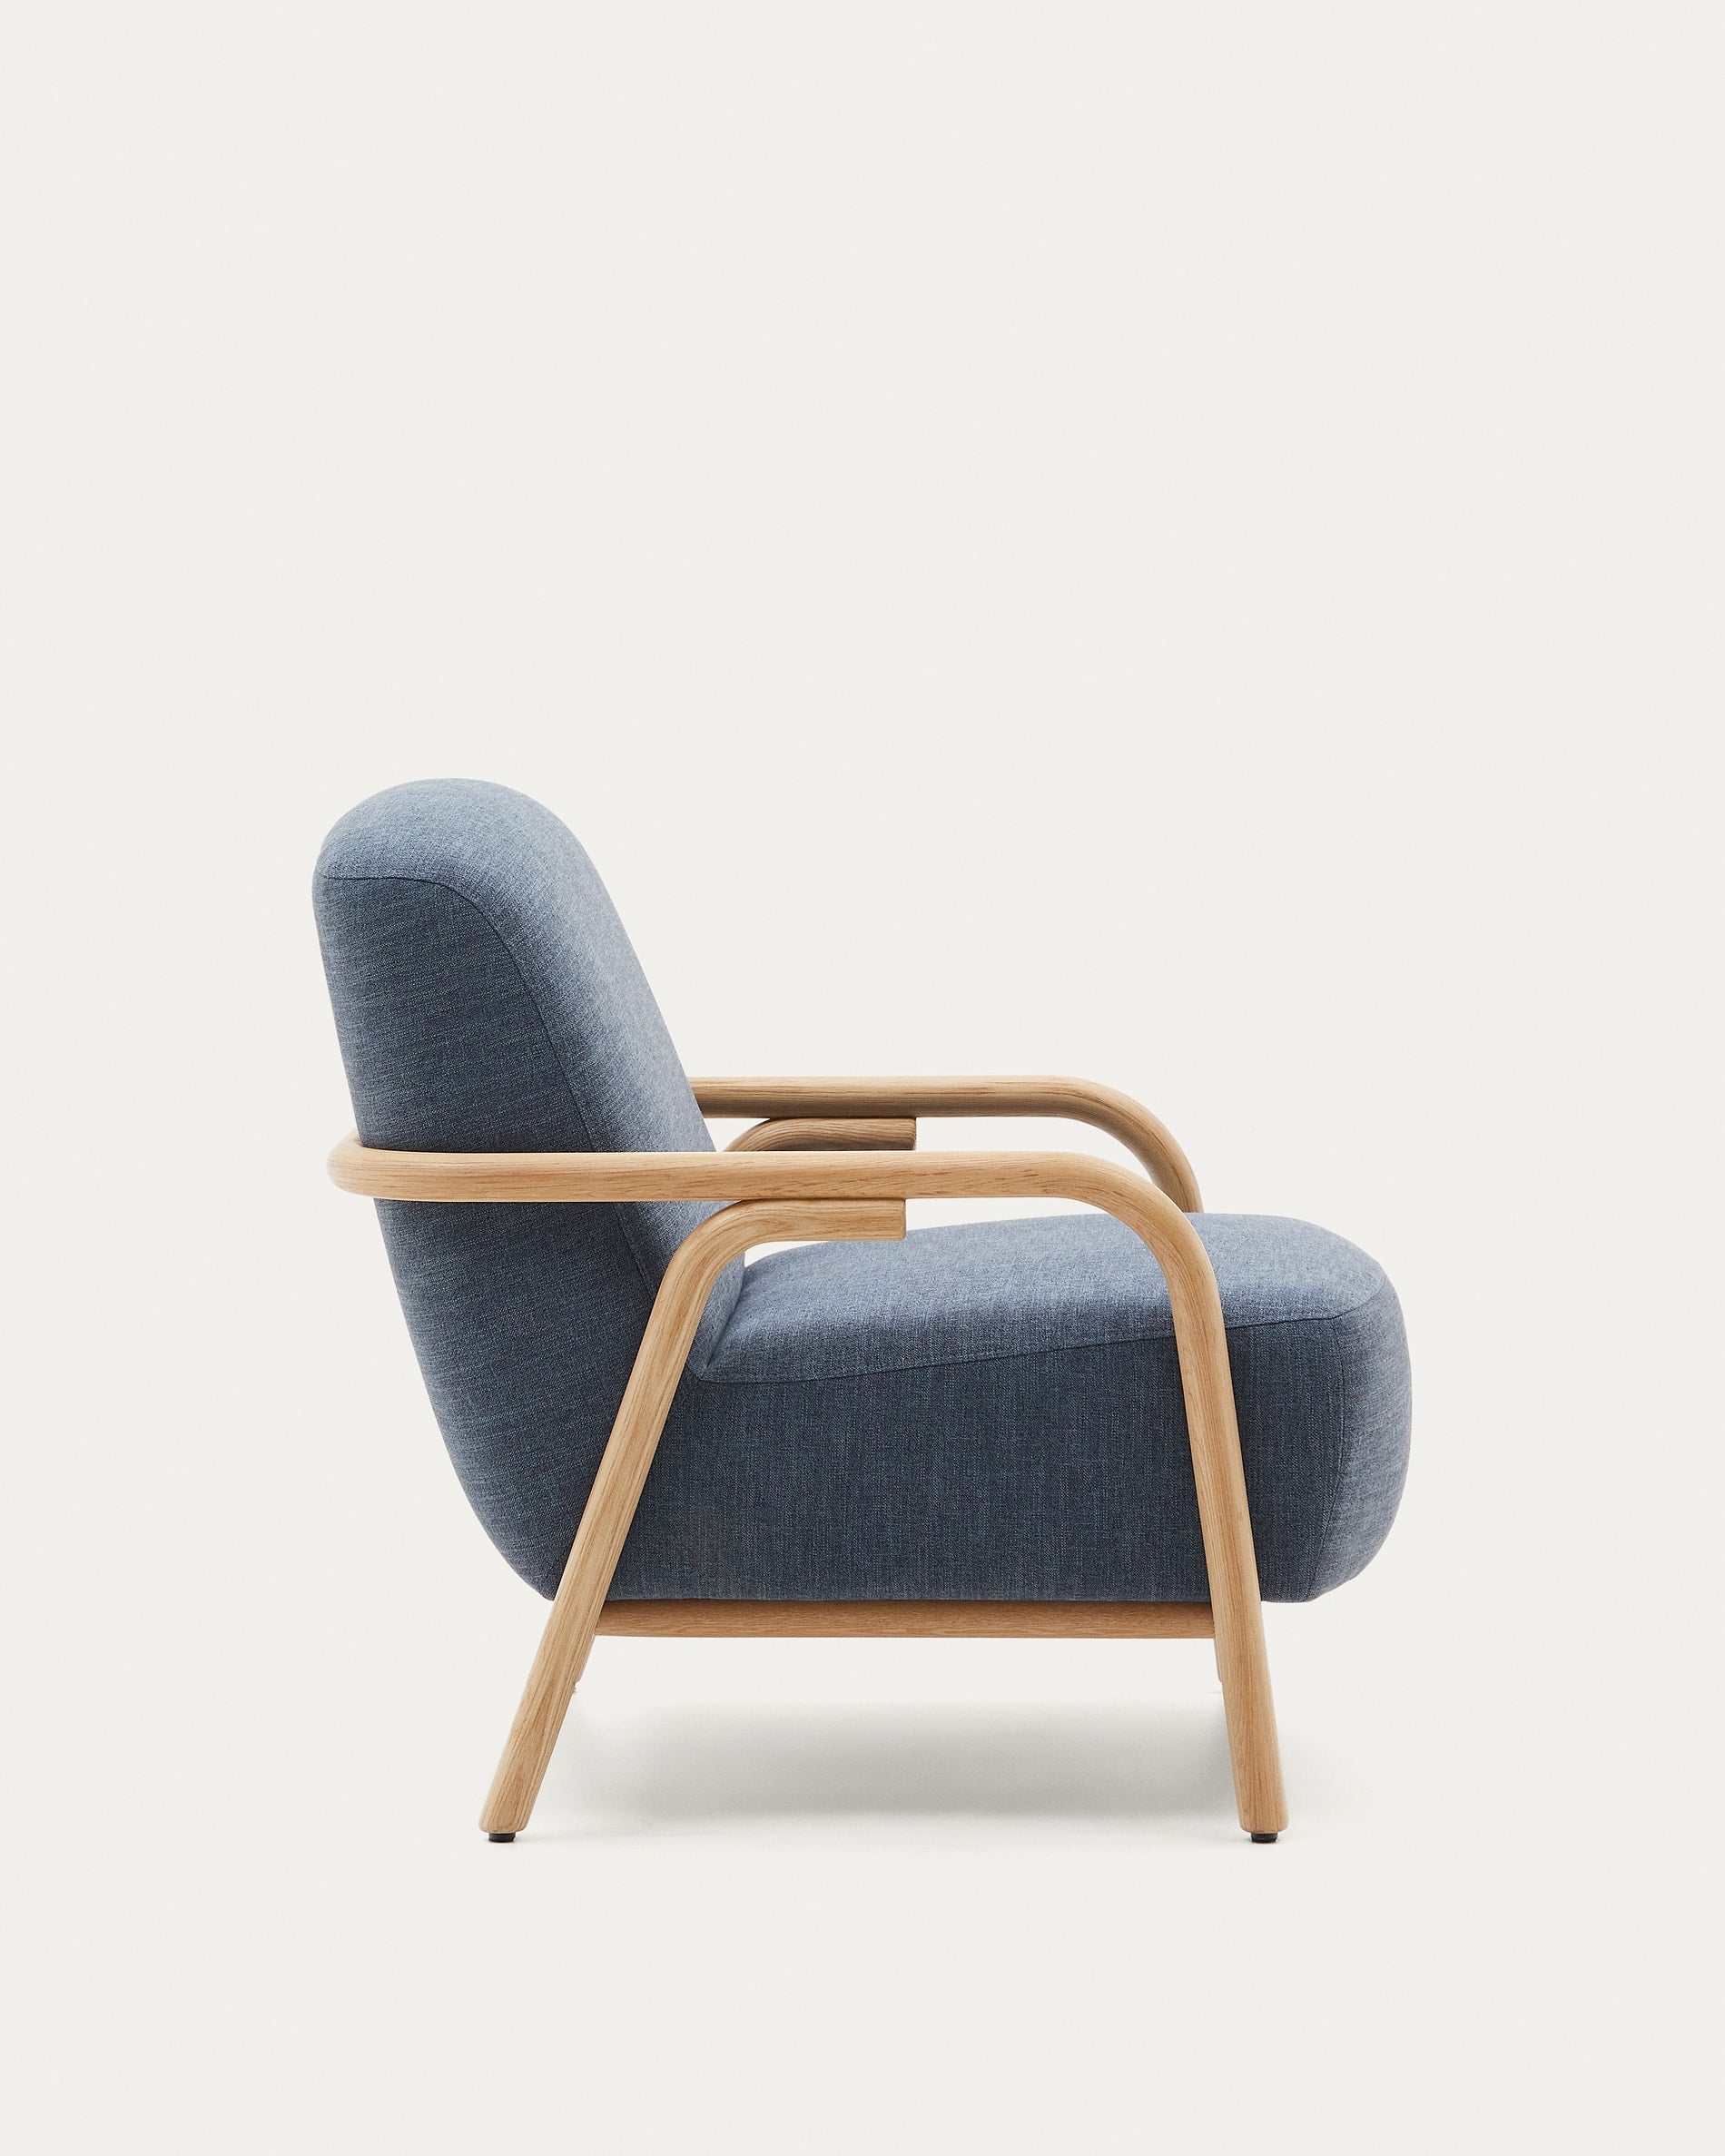 Sylo blue armchair, made of solid ash wood, 100% FSC